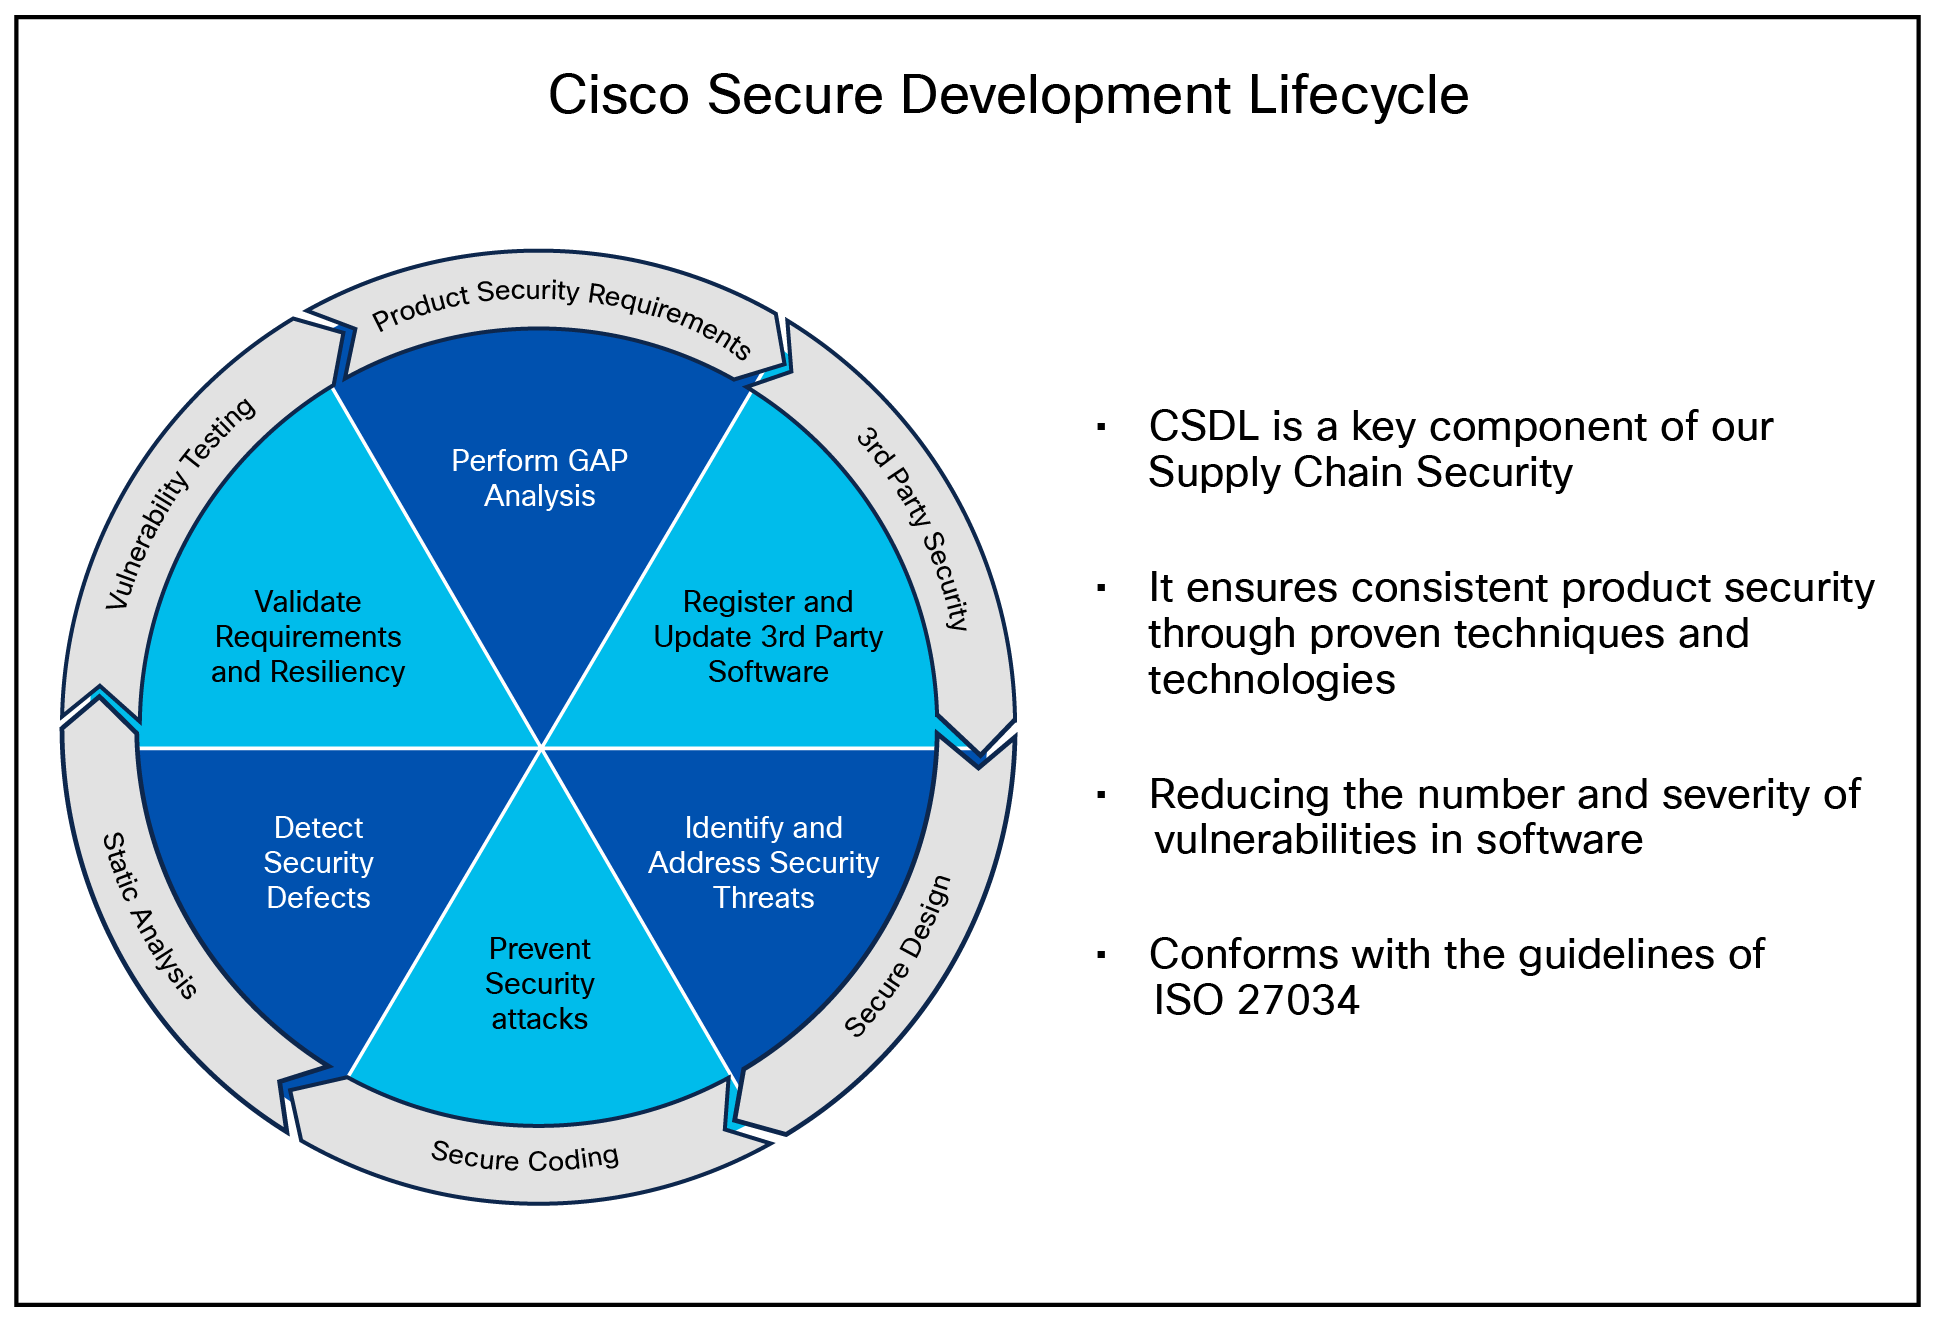 The Cisco Secure Product Development Lifecycle